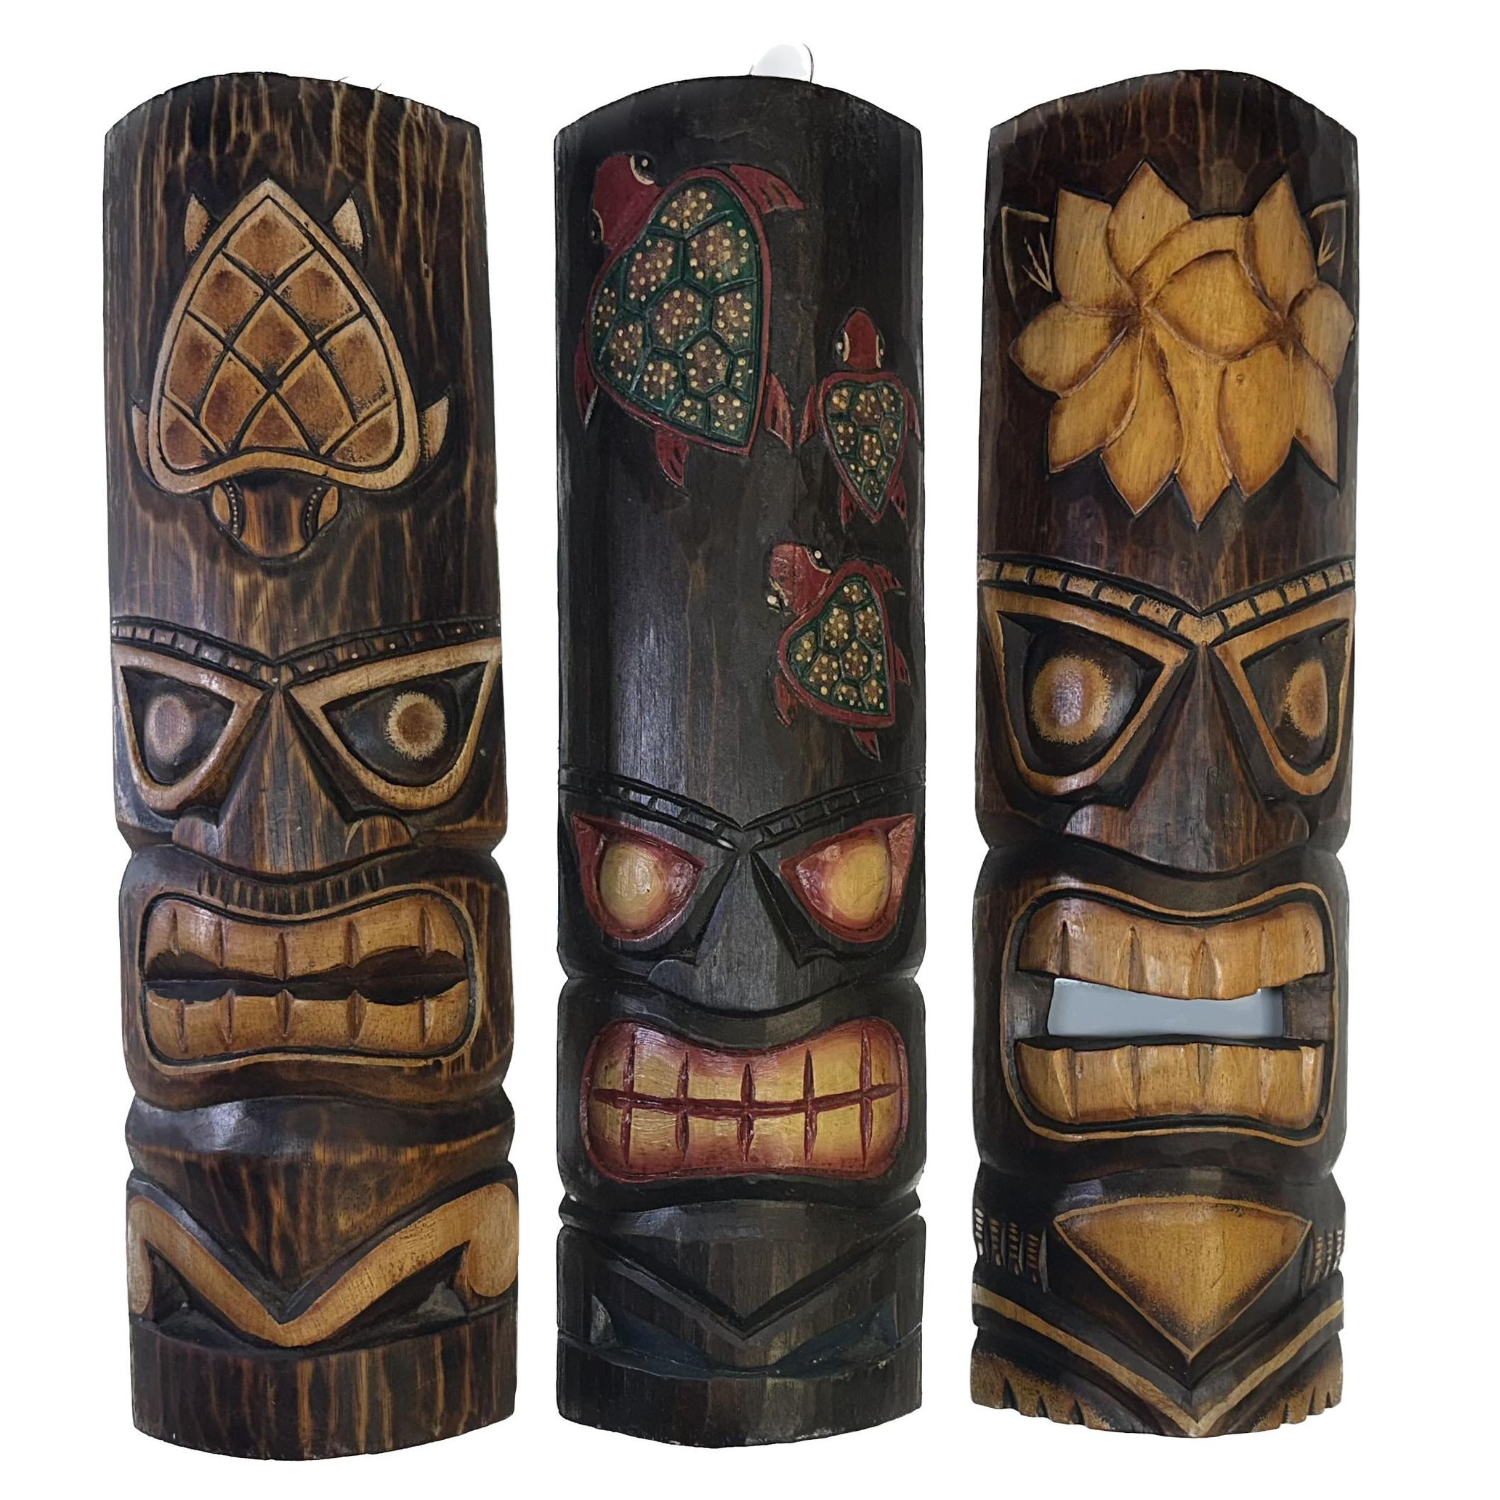 Indigenous Totem Mask - Wood Hand Carved / Painted 12" or 20"